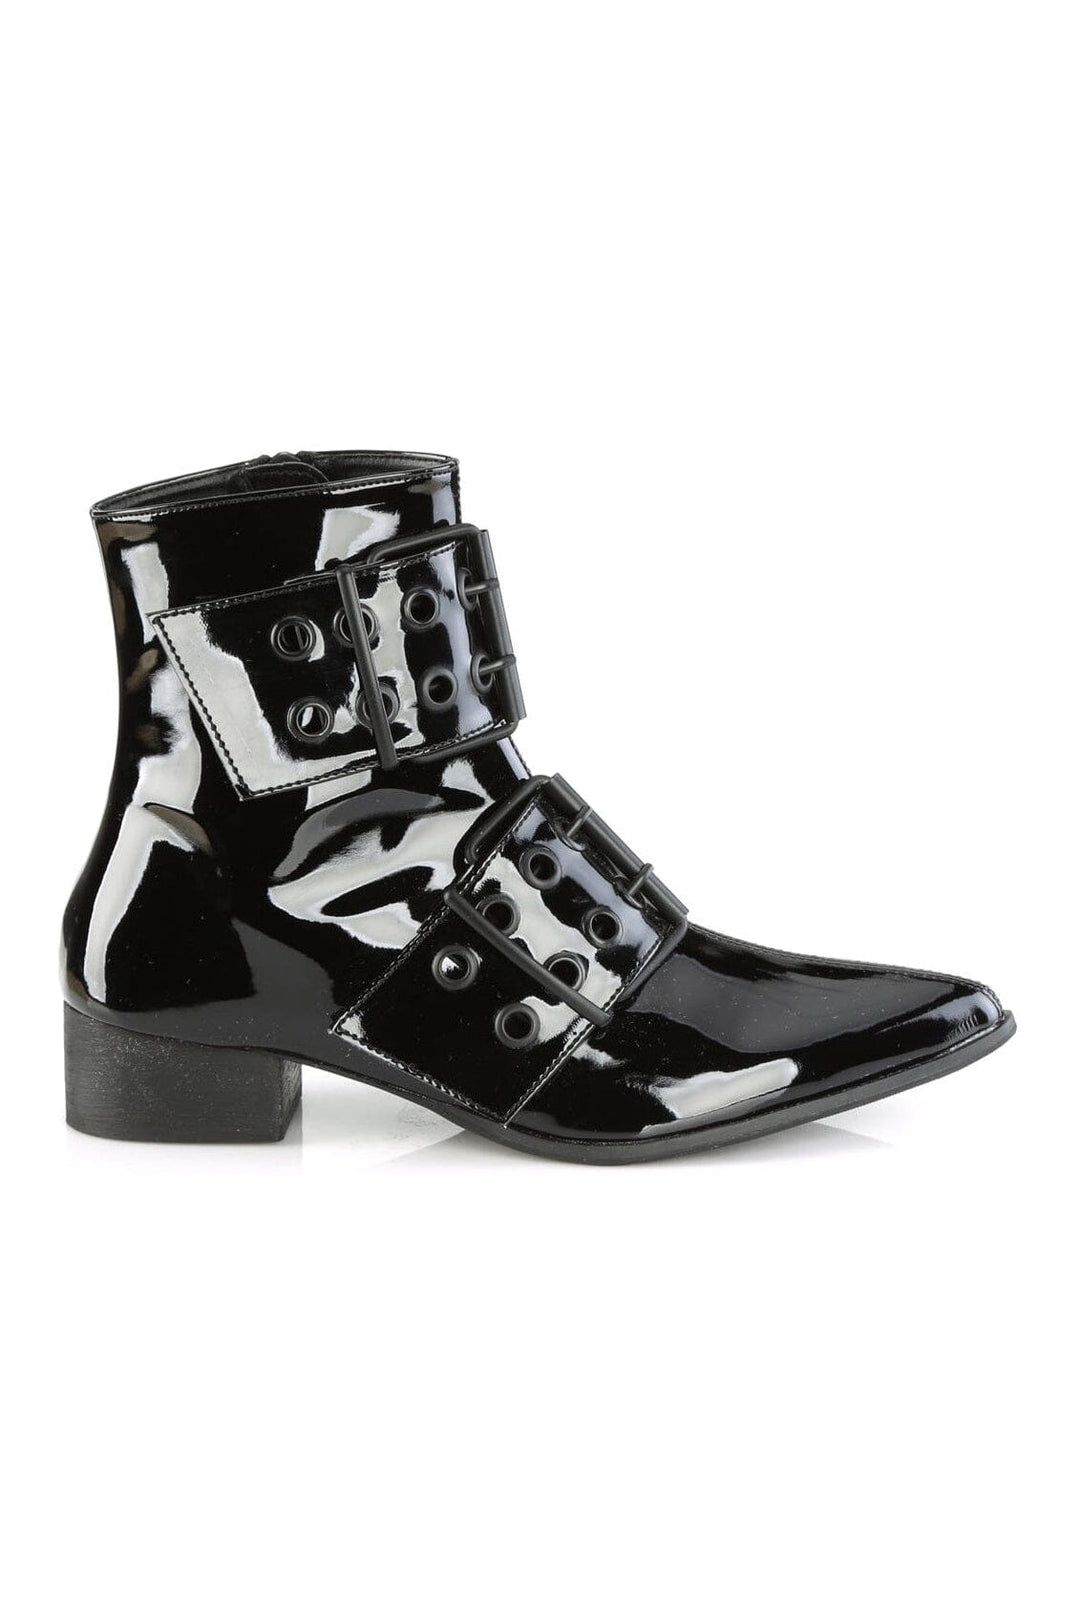 WARLOCK-55 Black Patent Ankle Boot-Ankle Boots-Demonia-SEXYSHOES.COM